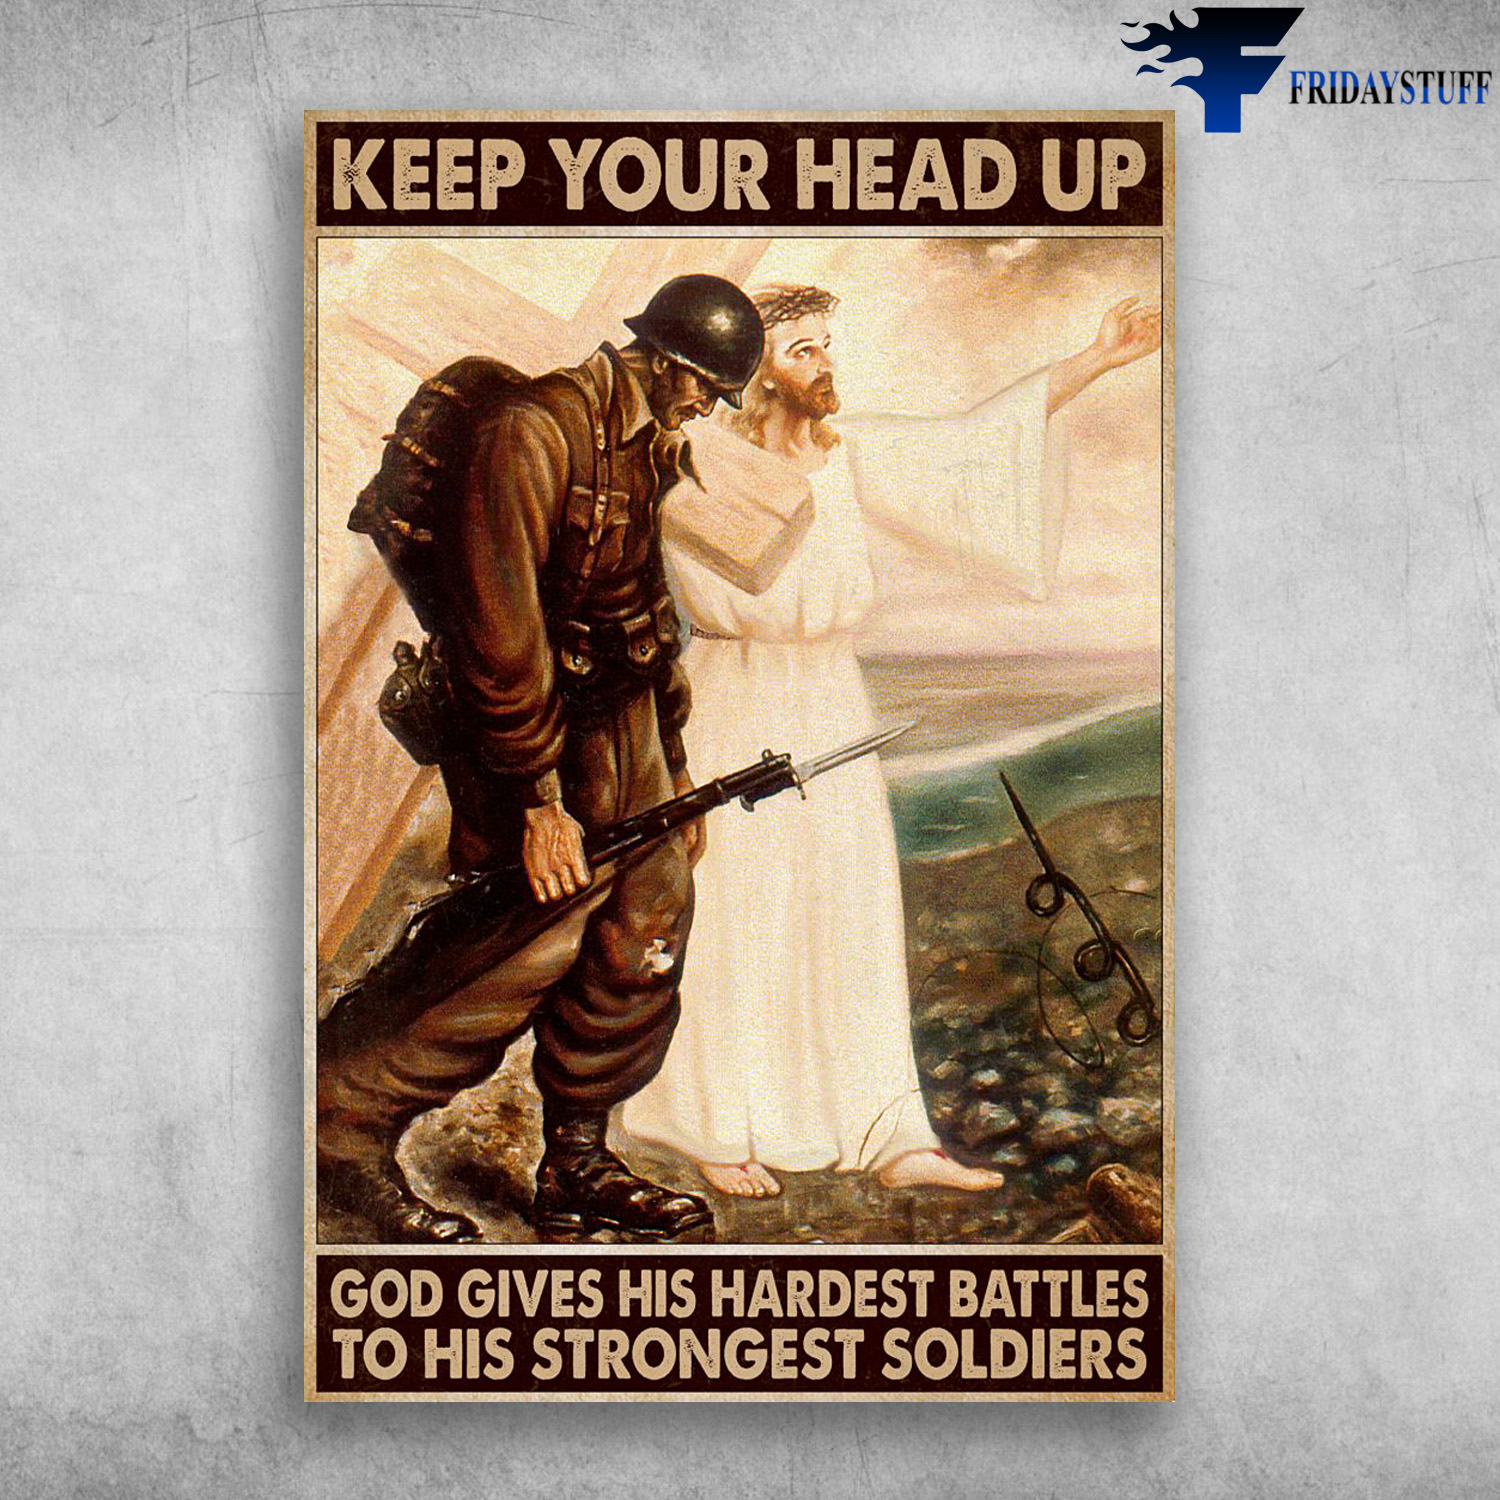 Soldier Walkinga With God - Keep Your Head Up, God Gives Hardest Battles, To His Strongest Soldiers